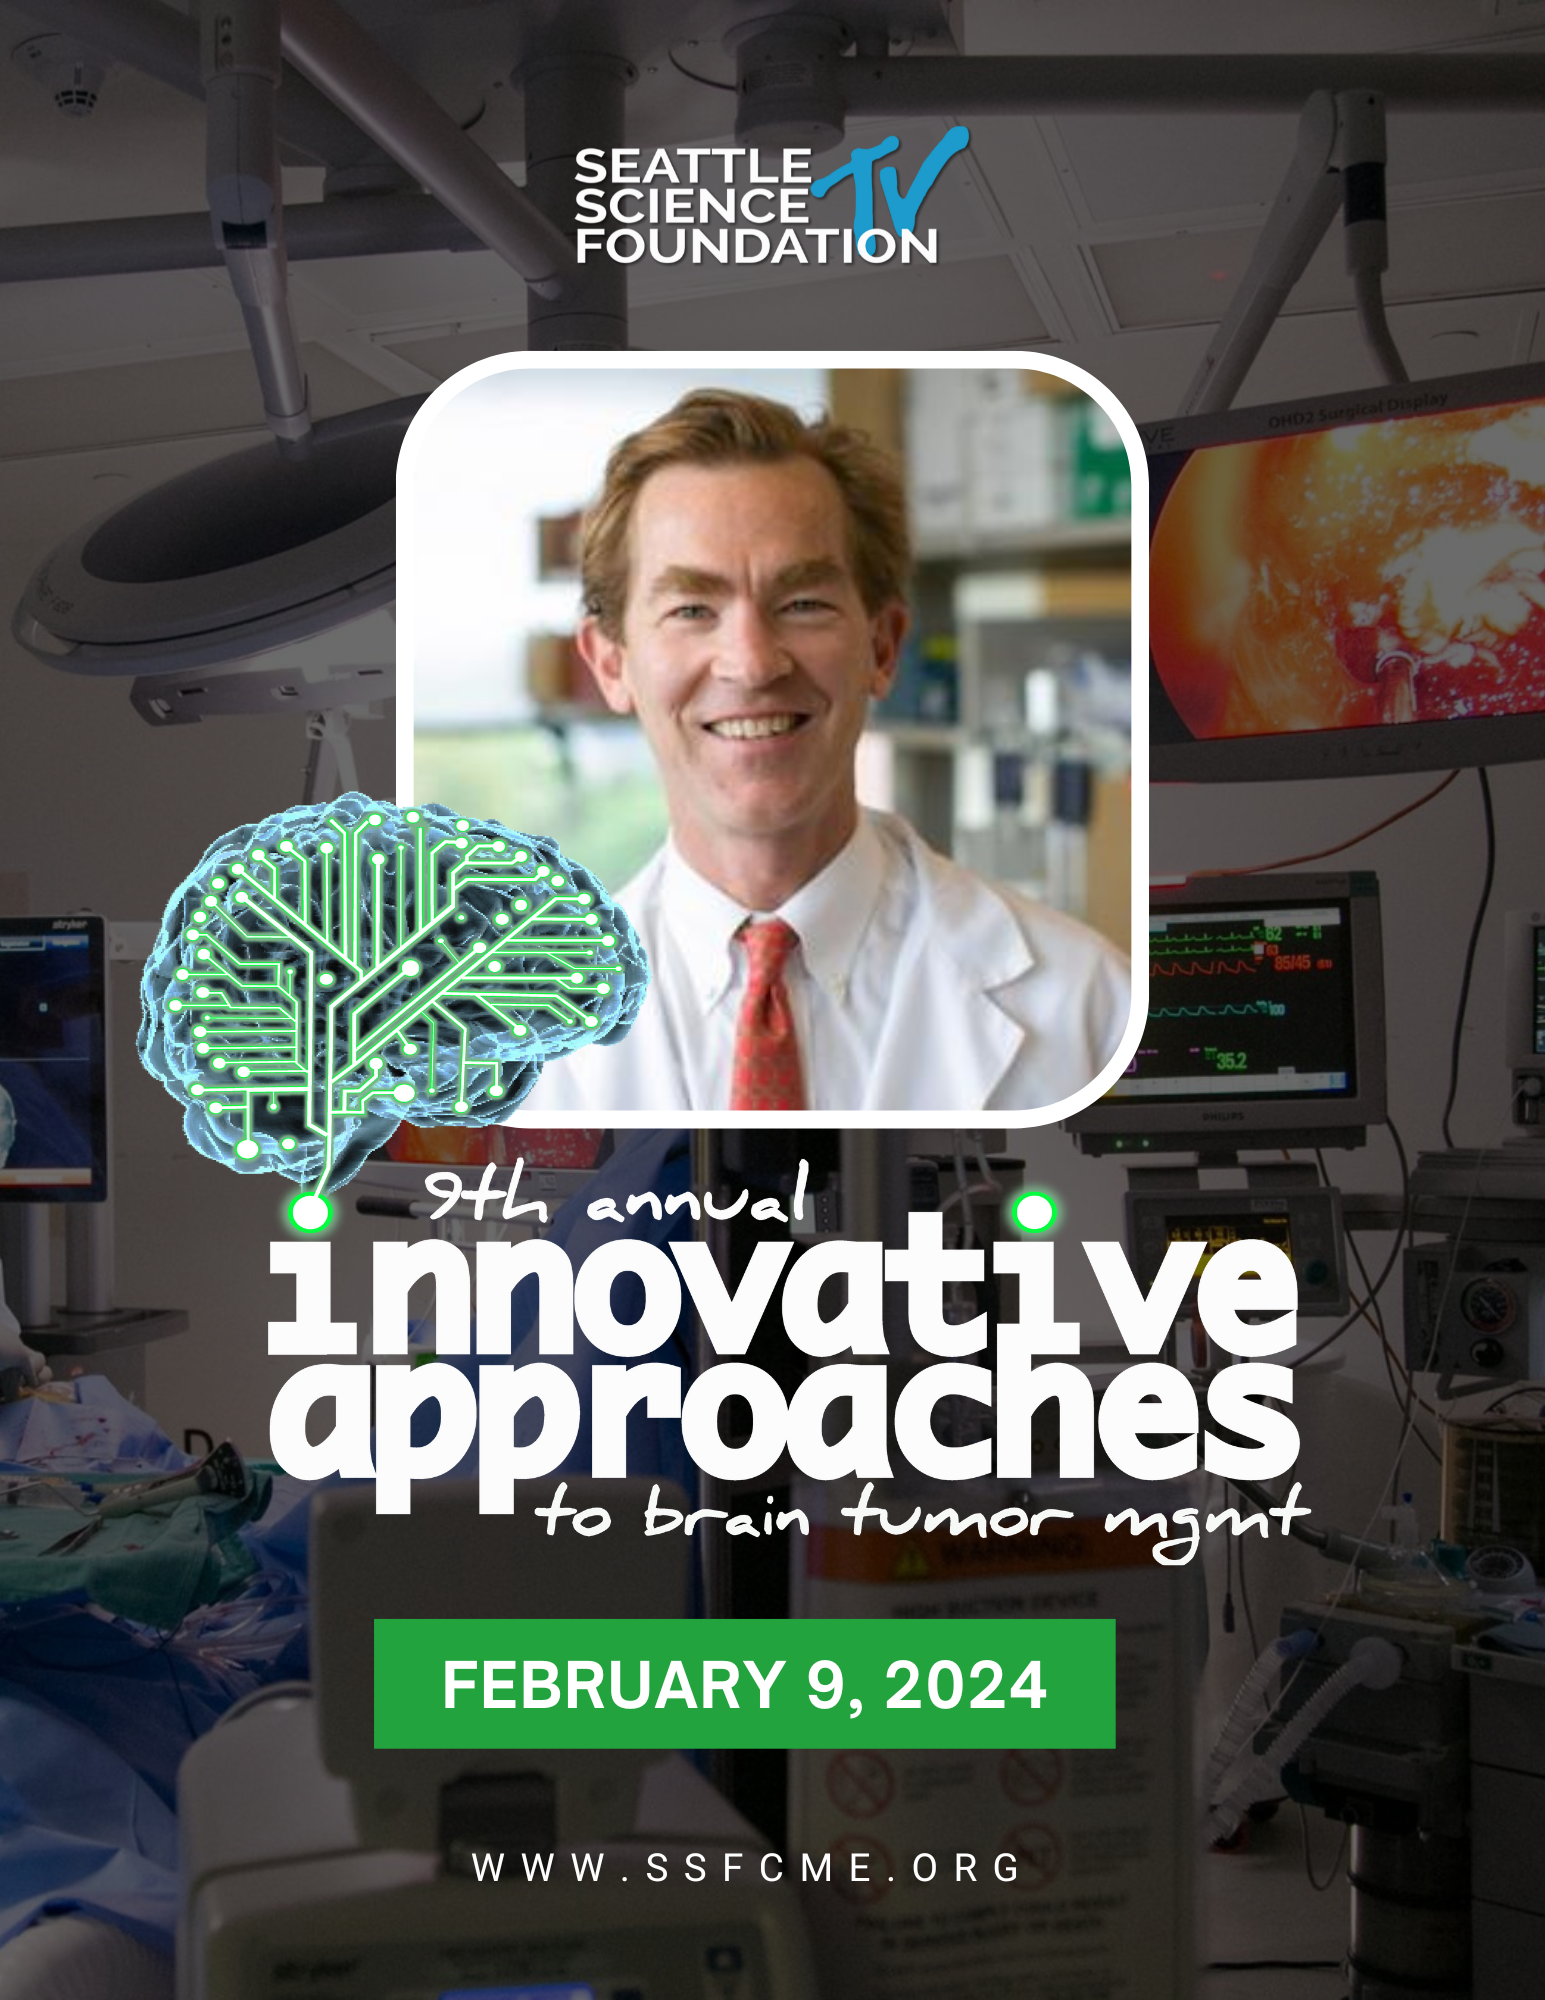 9th Annual Innovative Approaches to Brain Tumor Management 2024 Banner